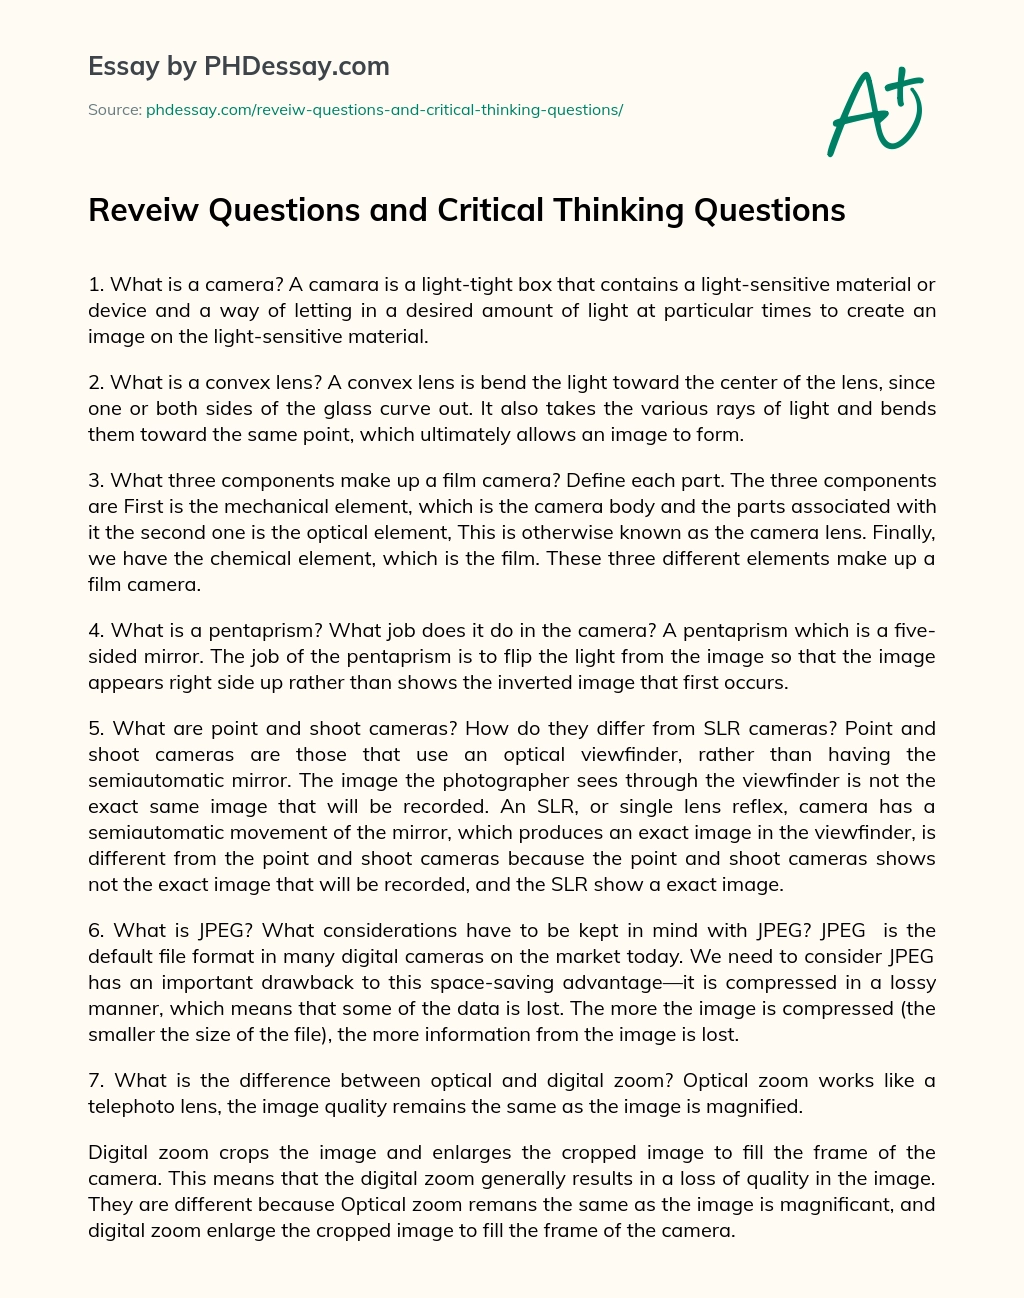 Reveiw Questions and Critical Thinking Questions essay